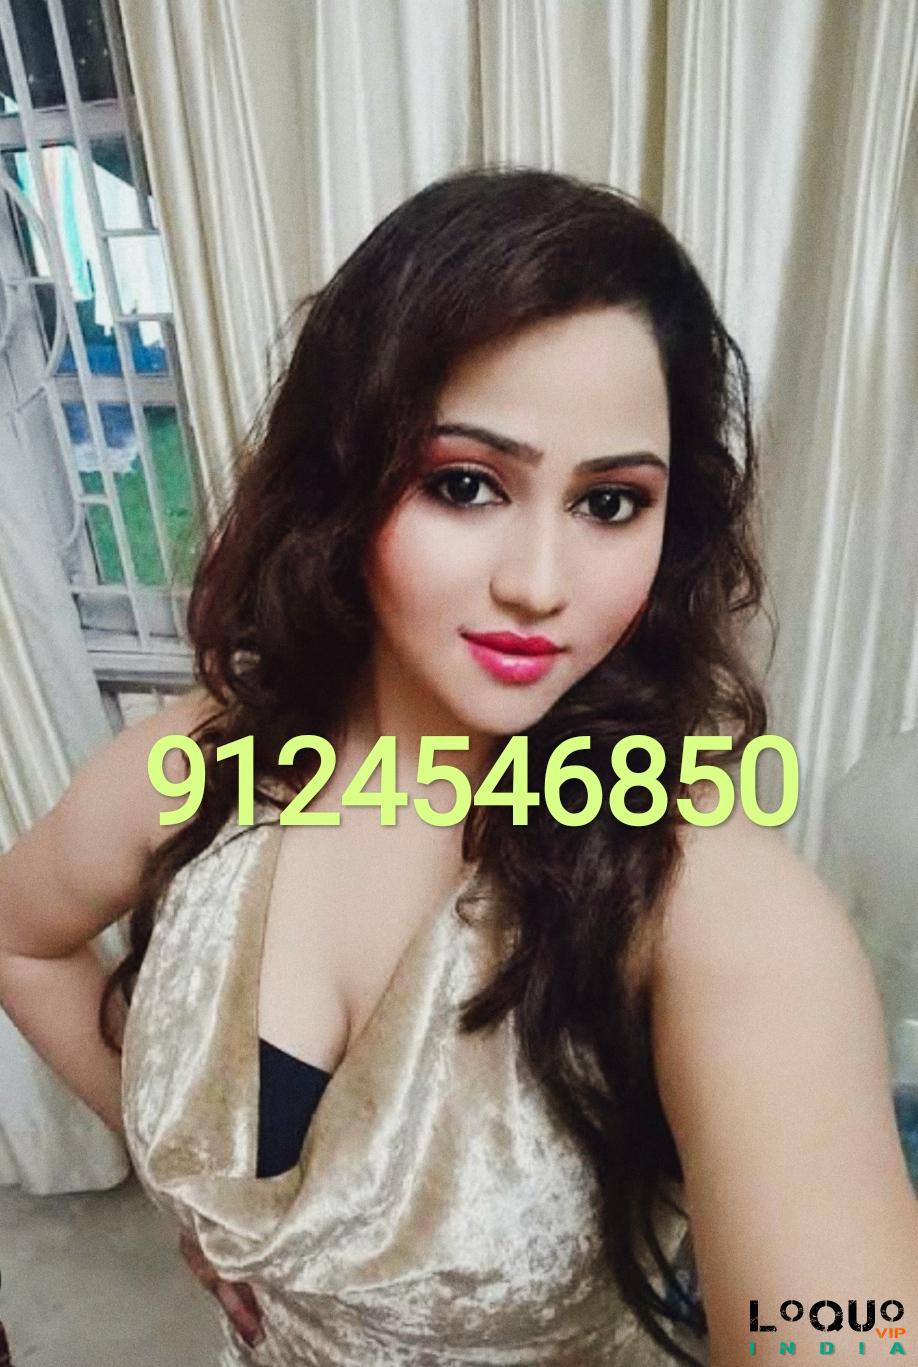 Call Girls Tamil Nadu: BEST LOW PRICE tamil FULL NUDE VIDEO CALL SERVICE❣️9124546850